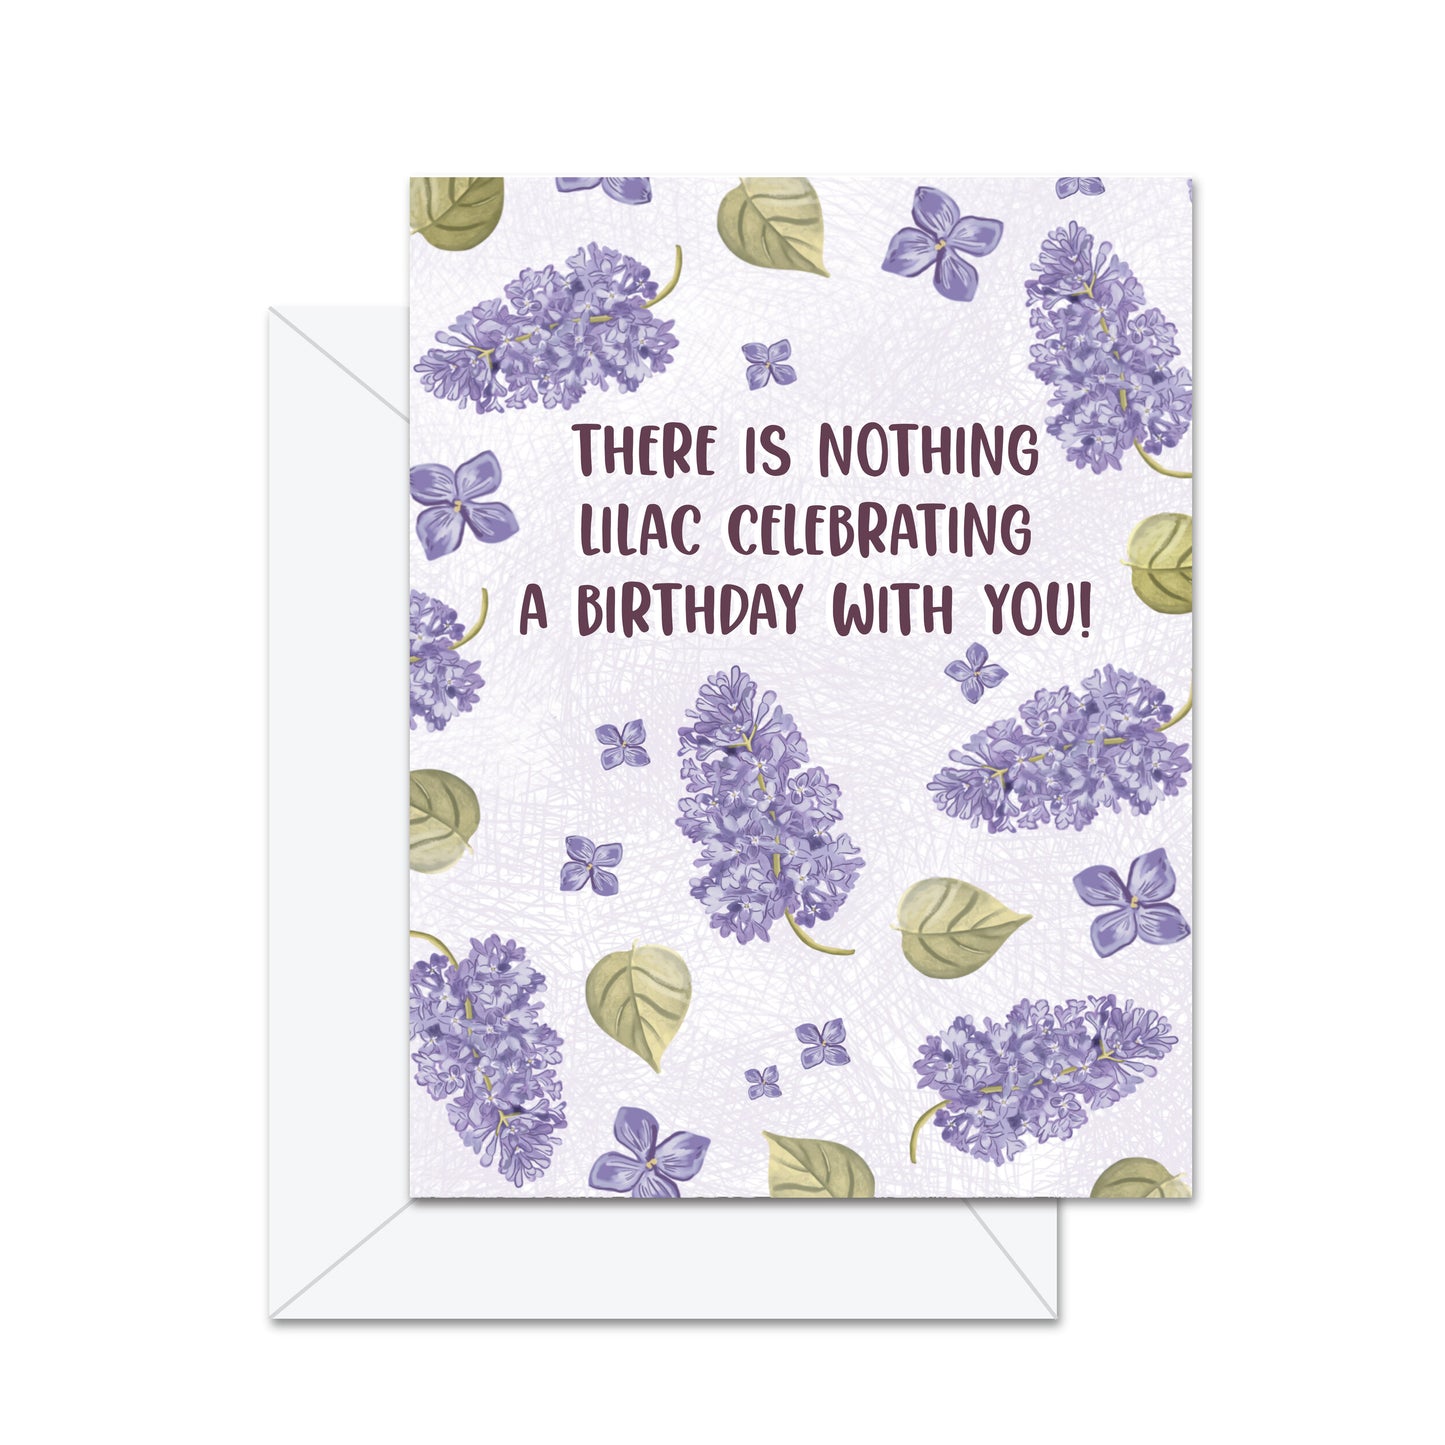 There Is Nothing Lilac Celebrating A Birthday With You! - Greeting Card